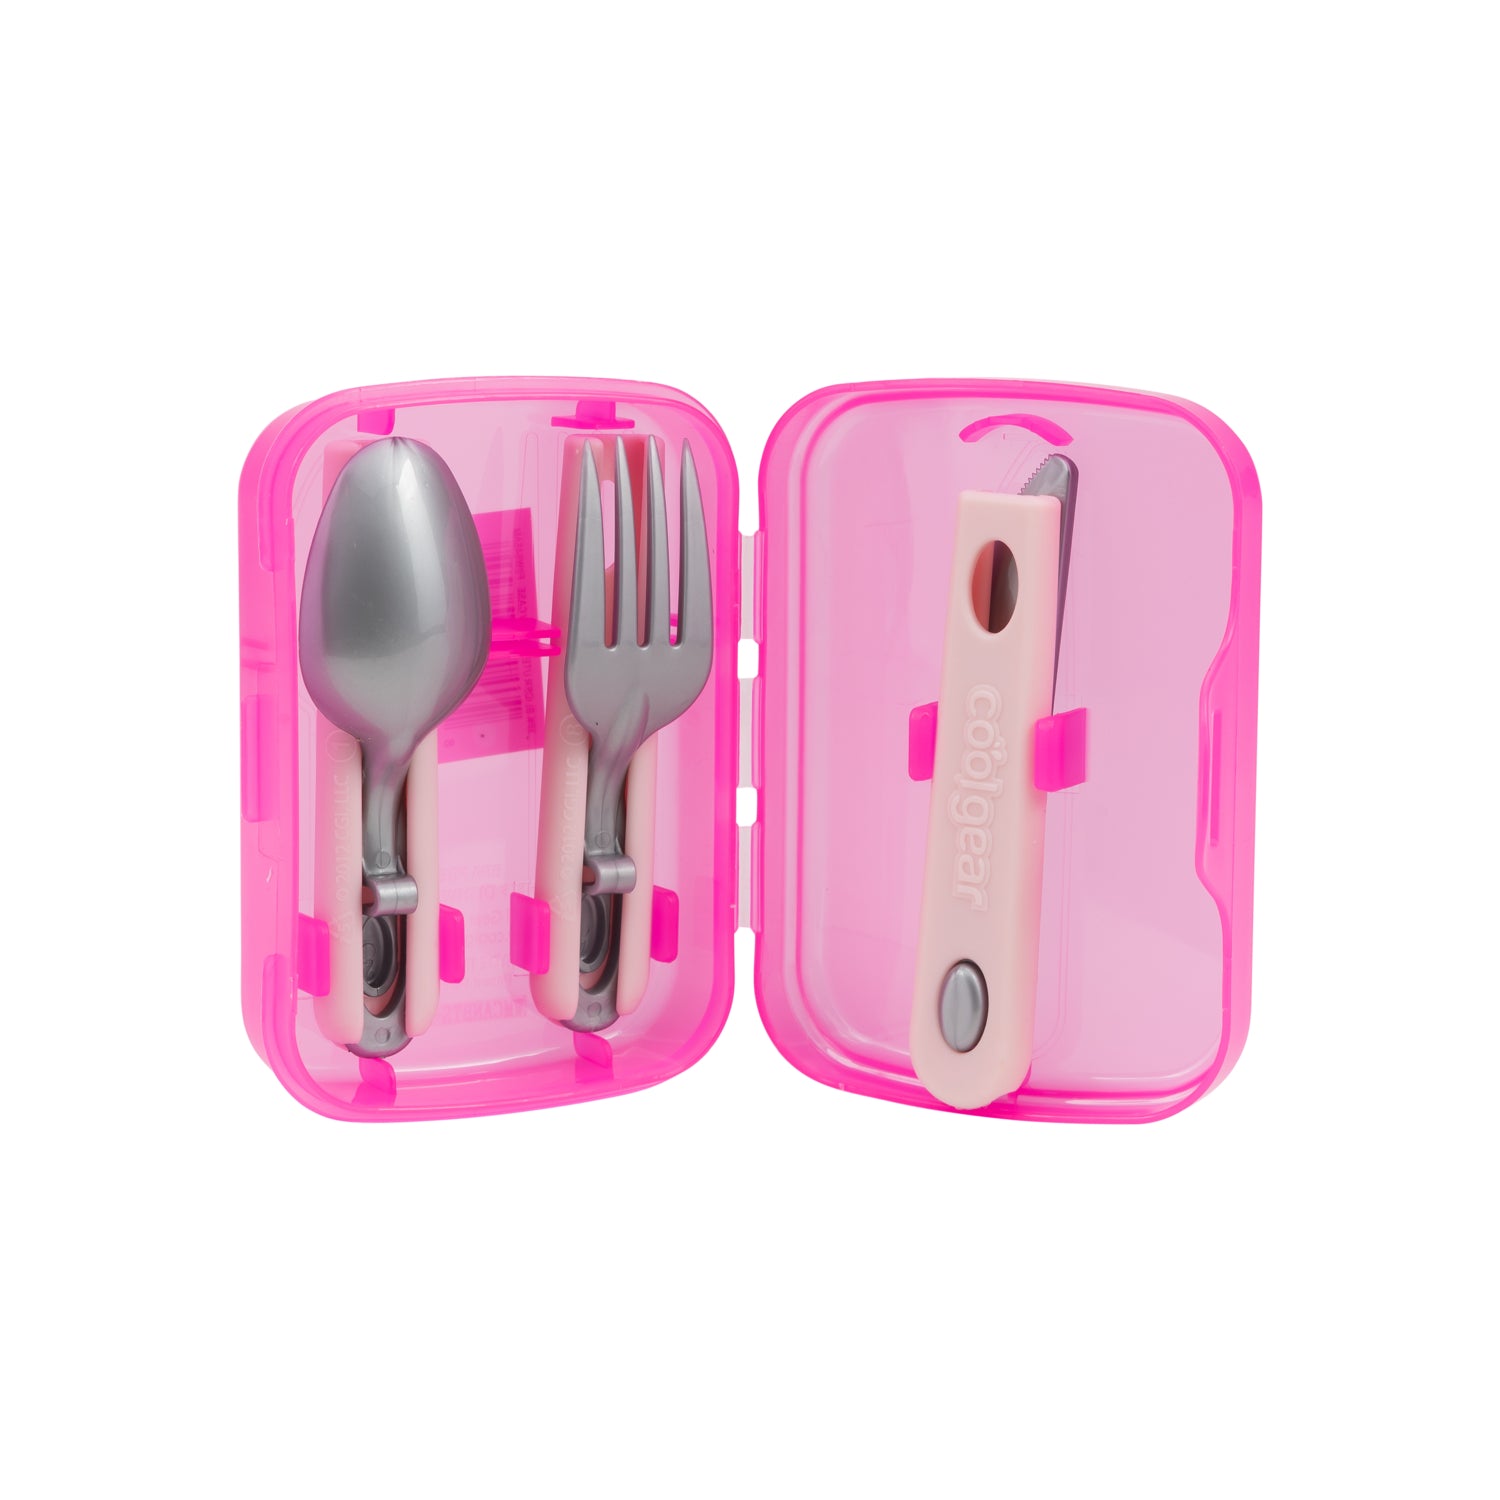 Travel Utensil Set with Storage Case - Reusable Spoon Knife Forks